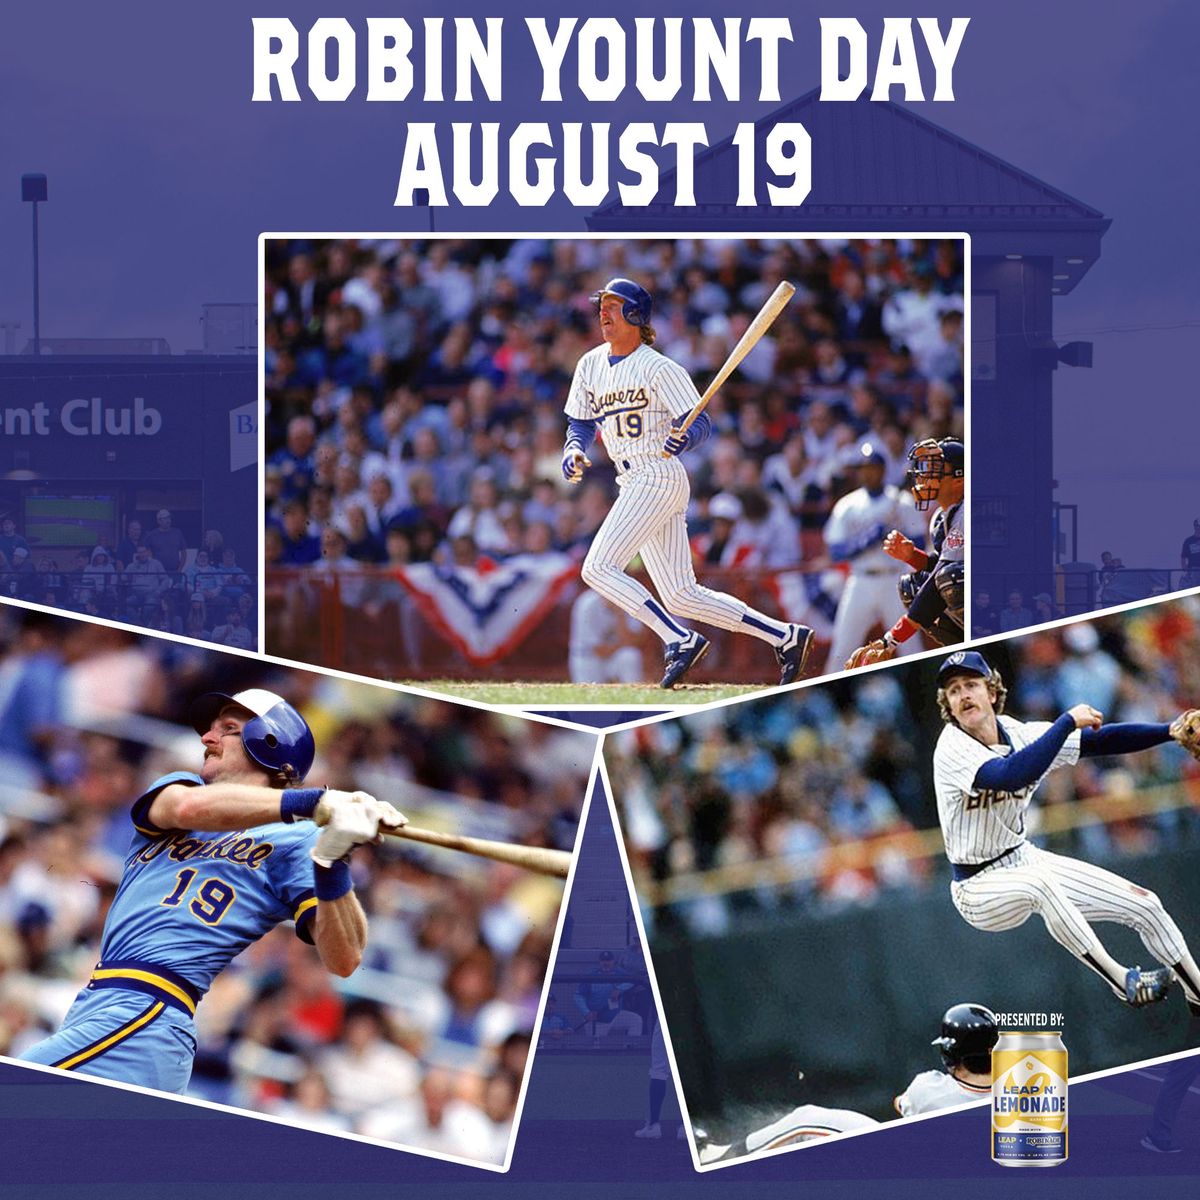 Robin Yount Day